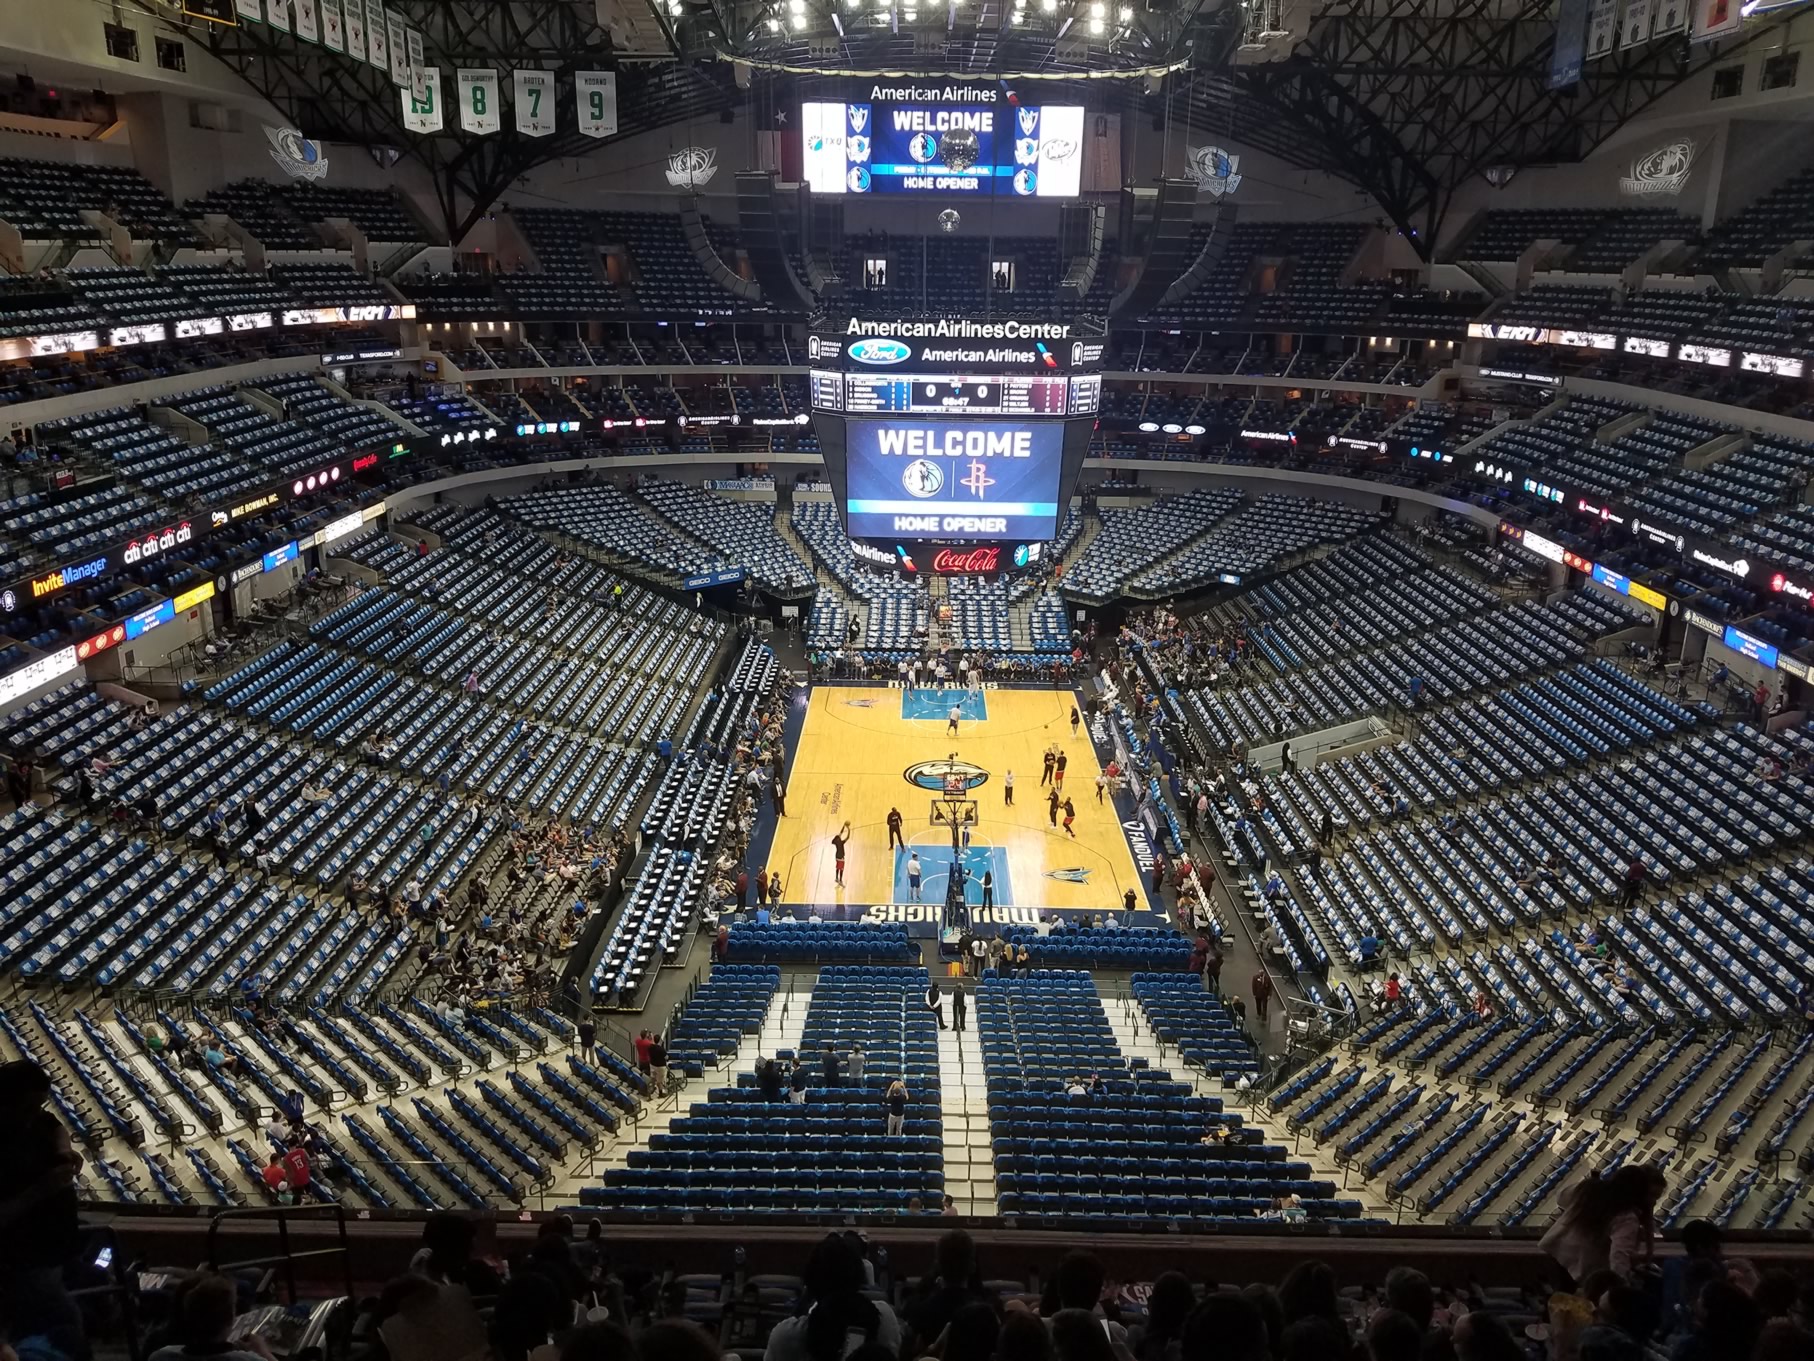 section 301, row g seat view  for basketball - american airlines center